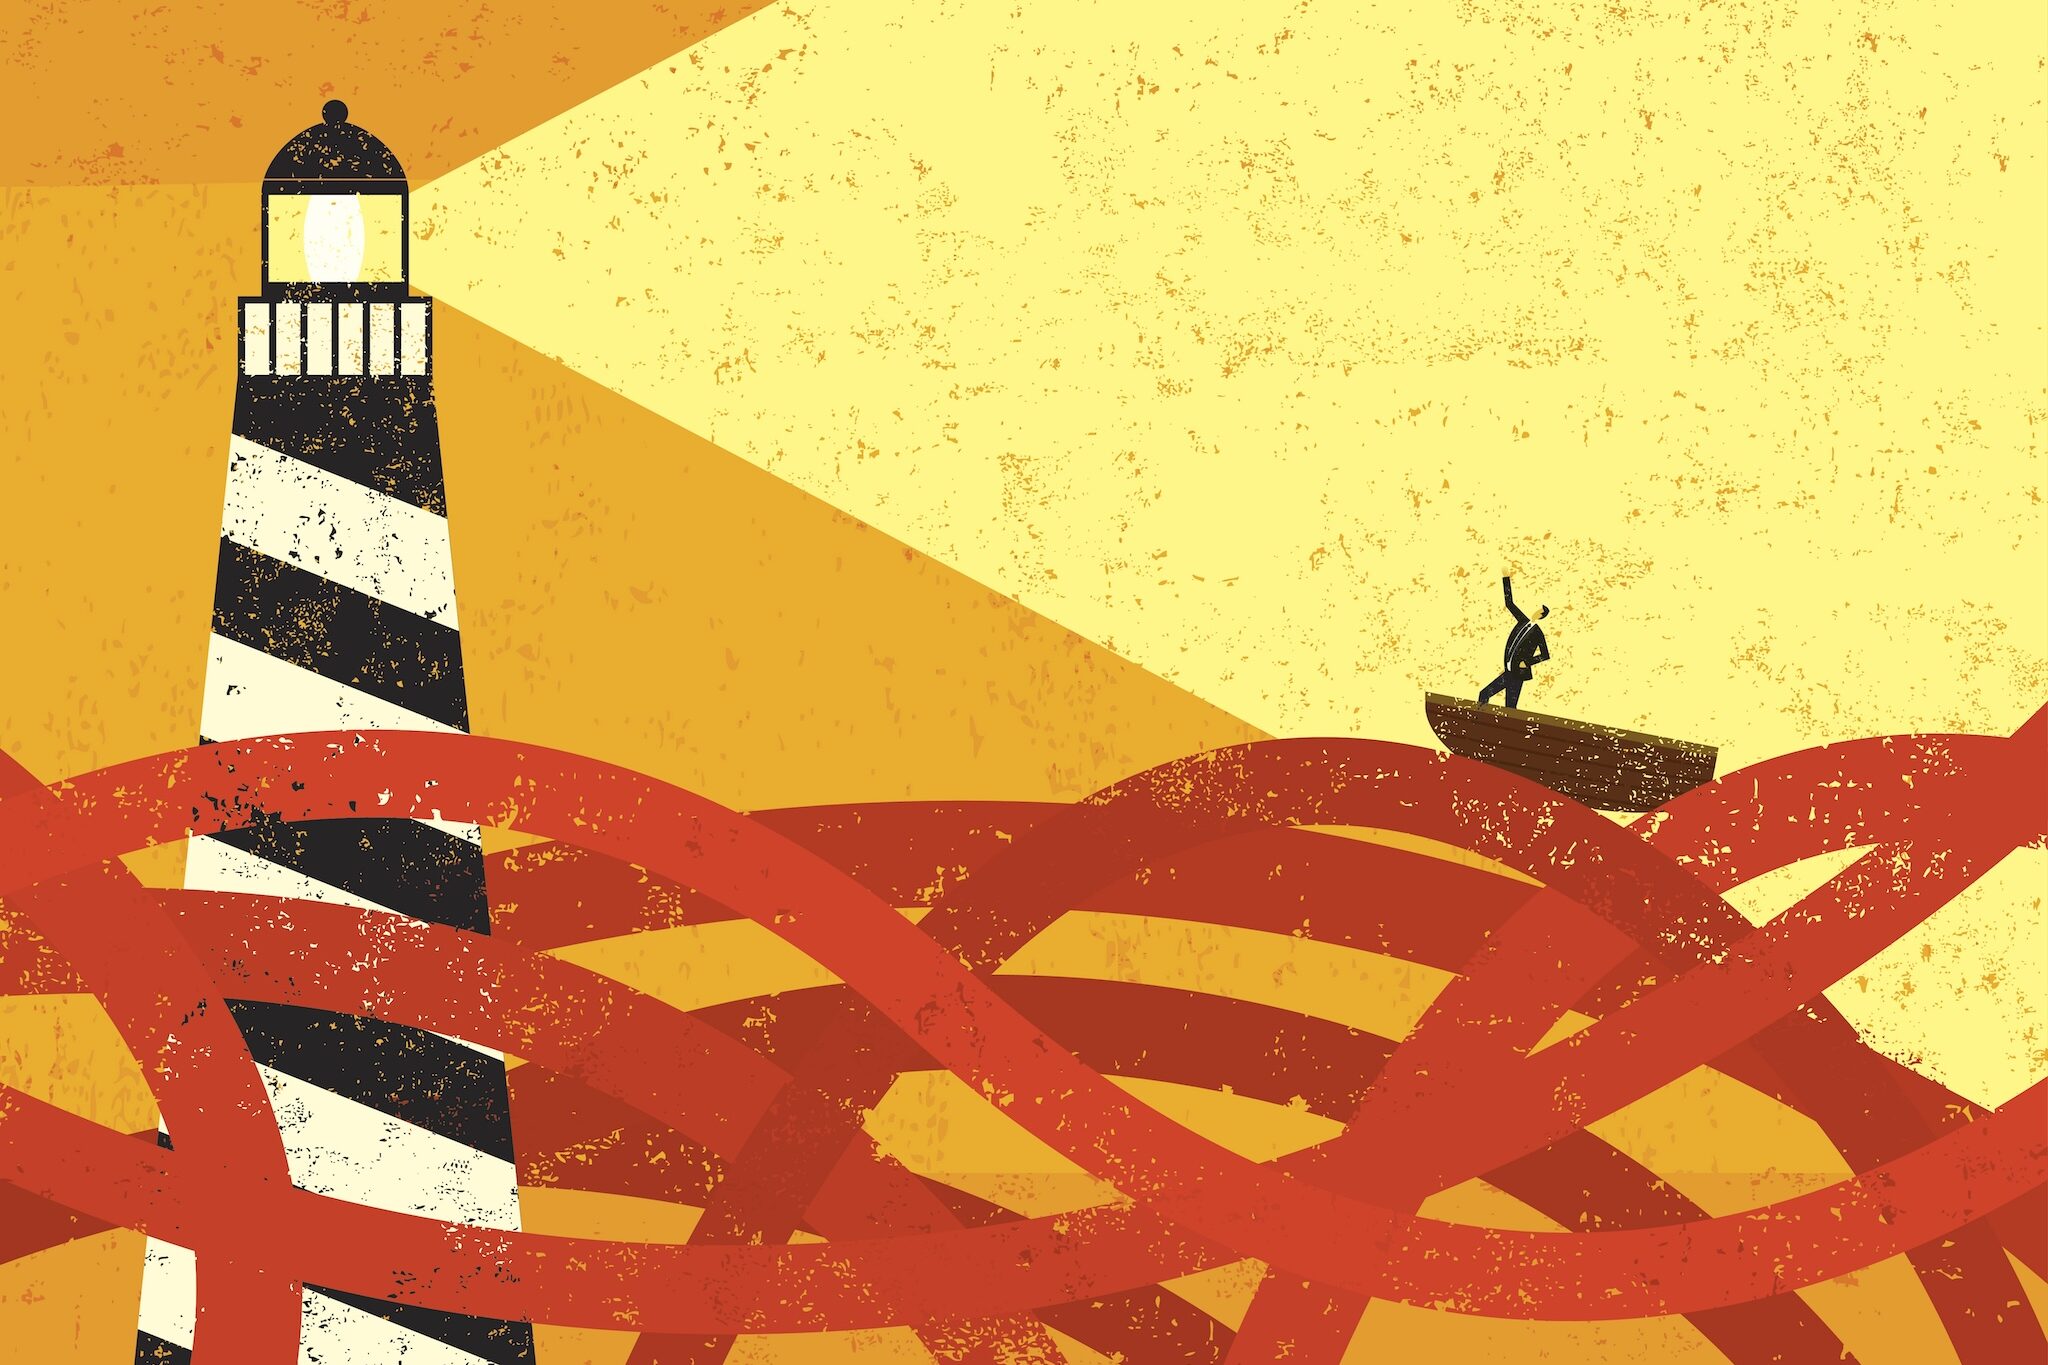 An illustration of a boat being guided by a lighthouse.